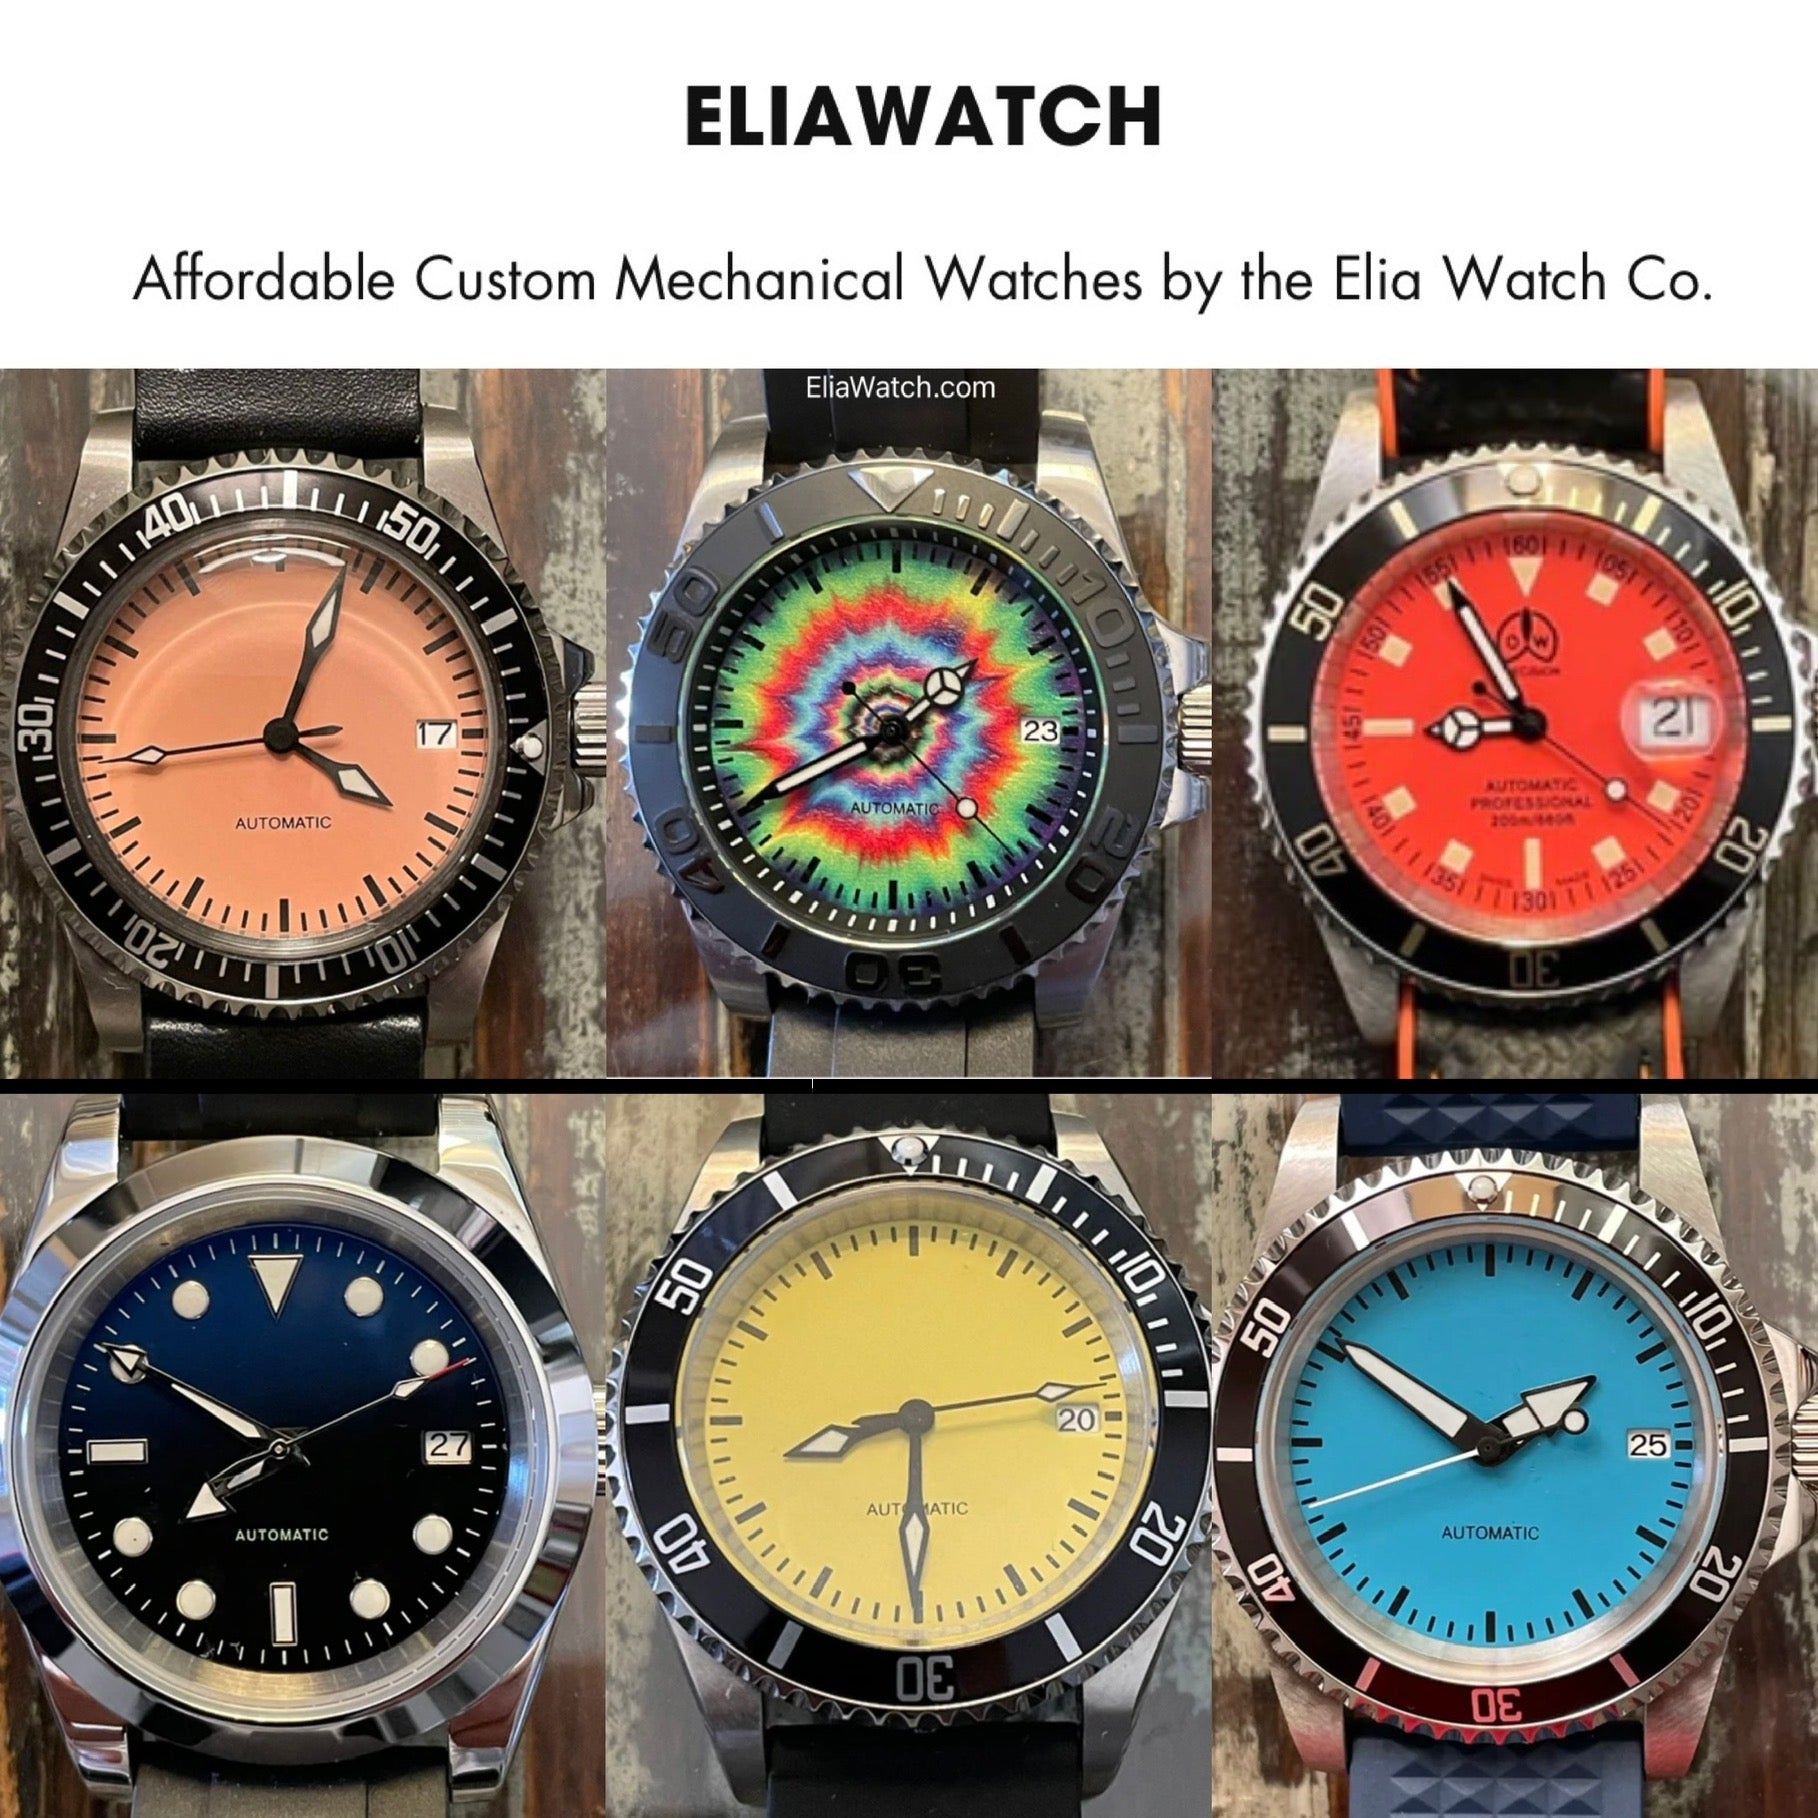 Mechanical Watches that are artistic, stylized and sharp